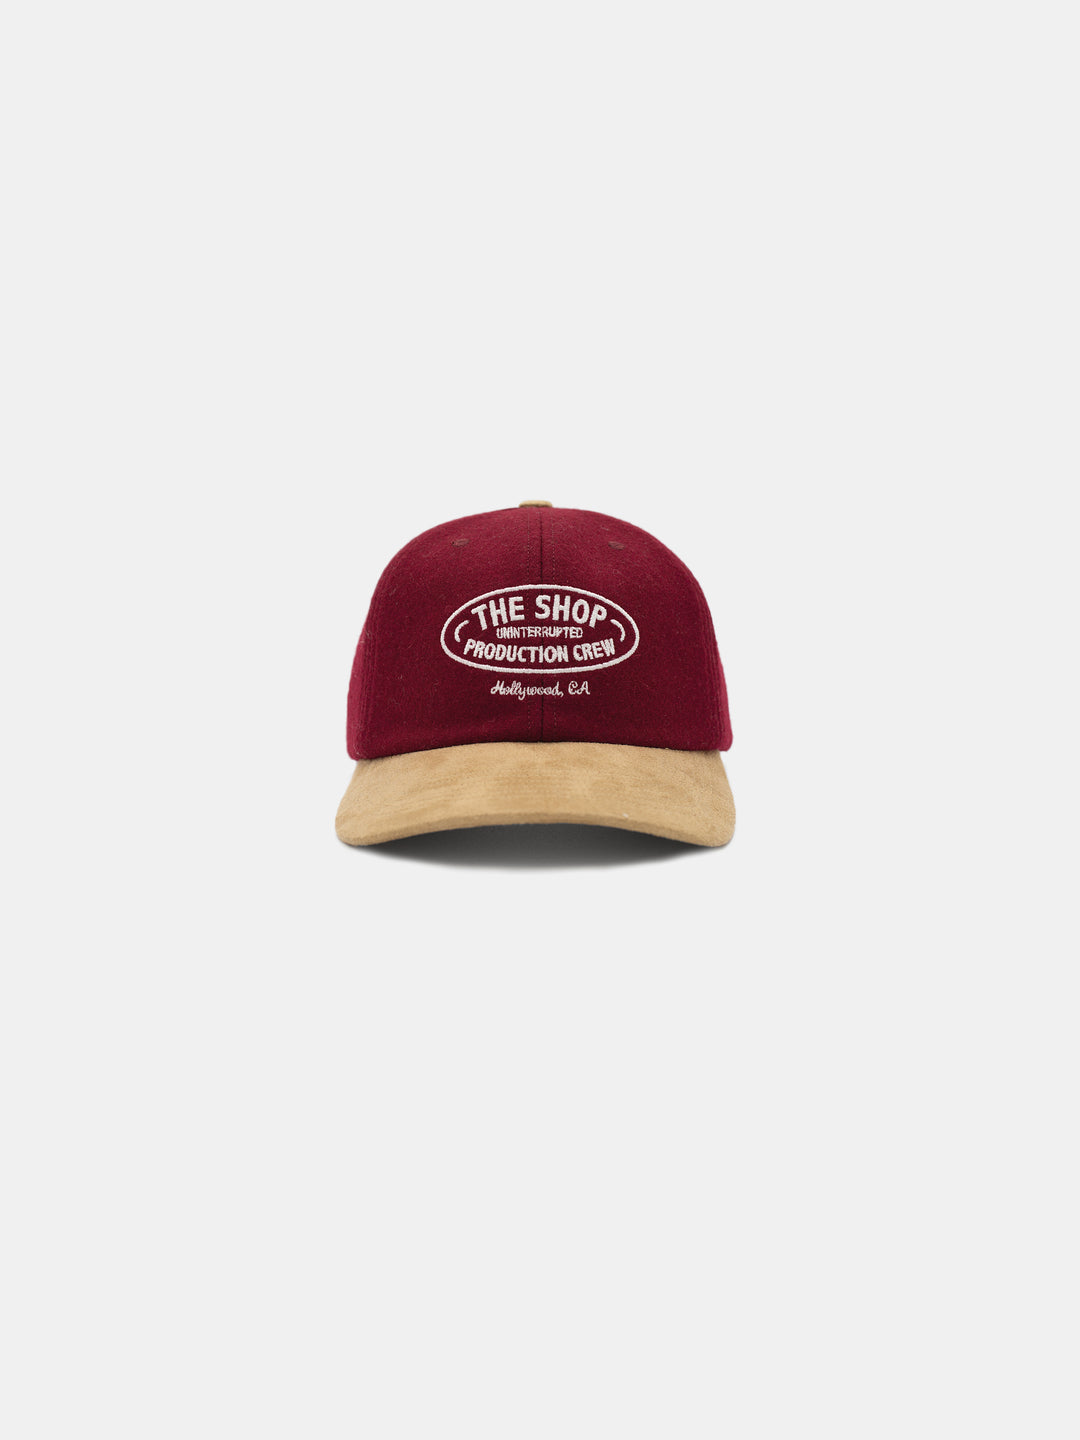 The Shop Wool Crew Hat Burgundy - Front